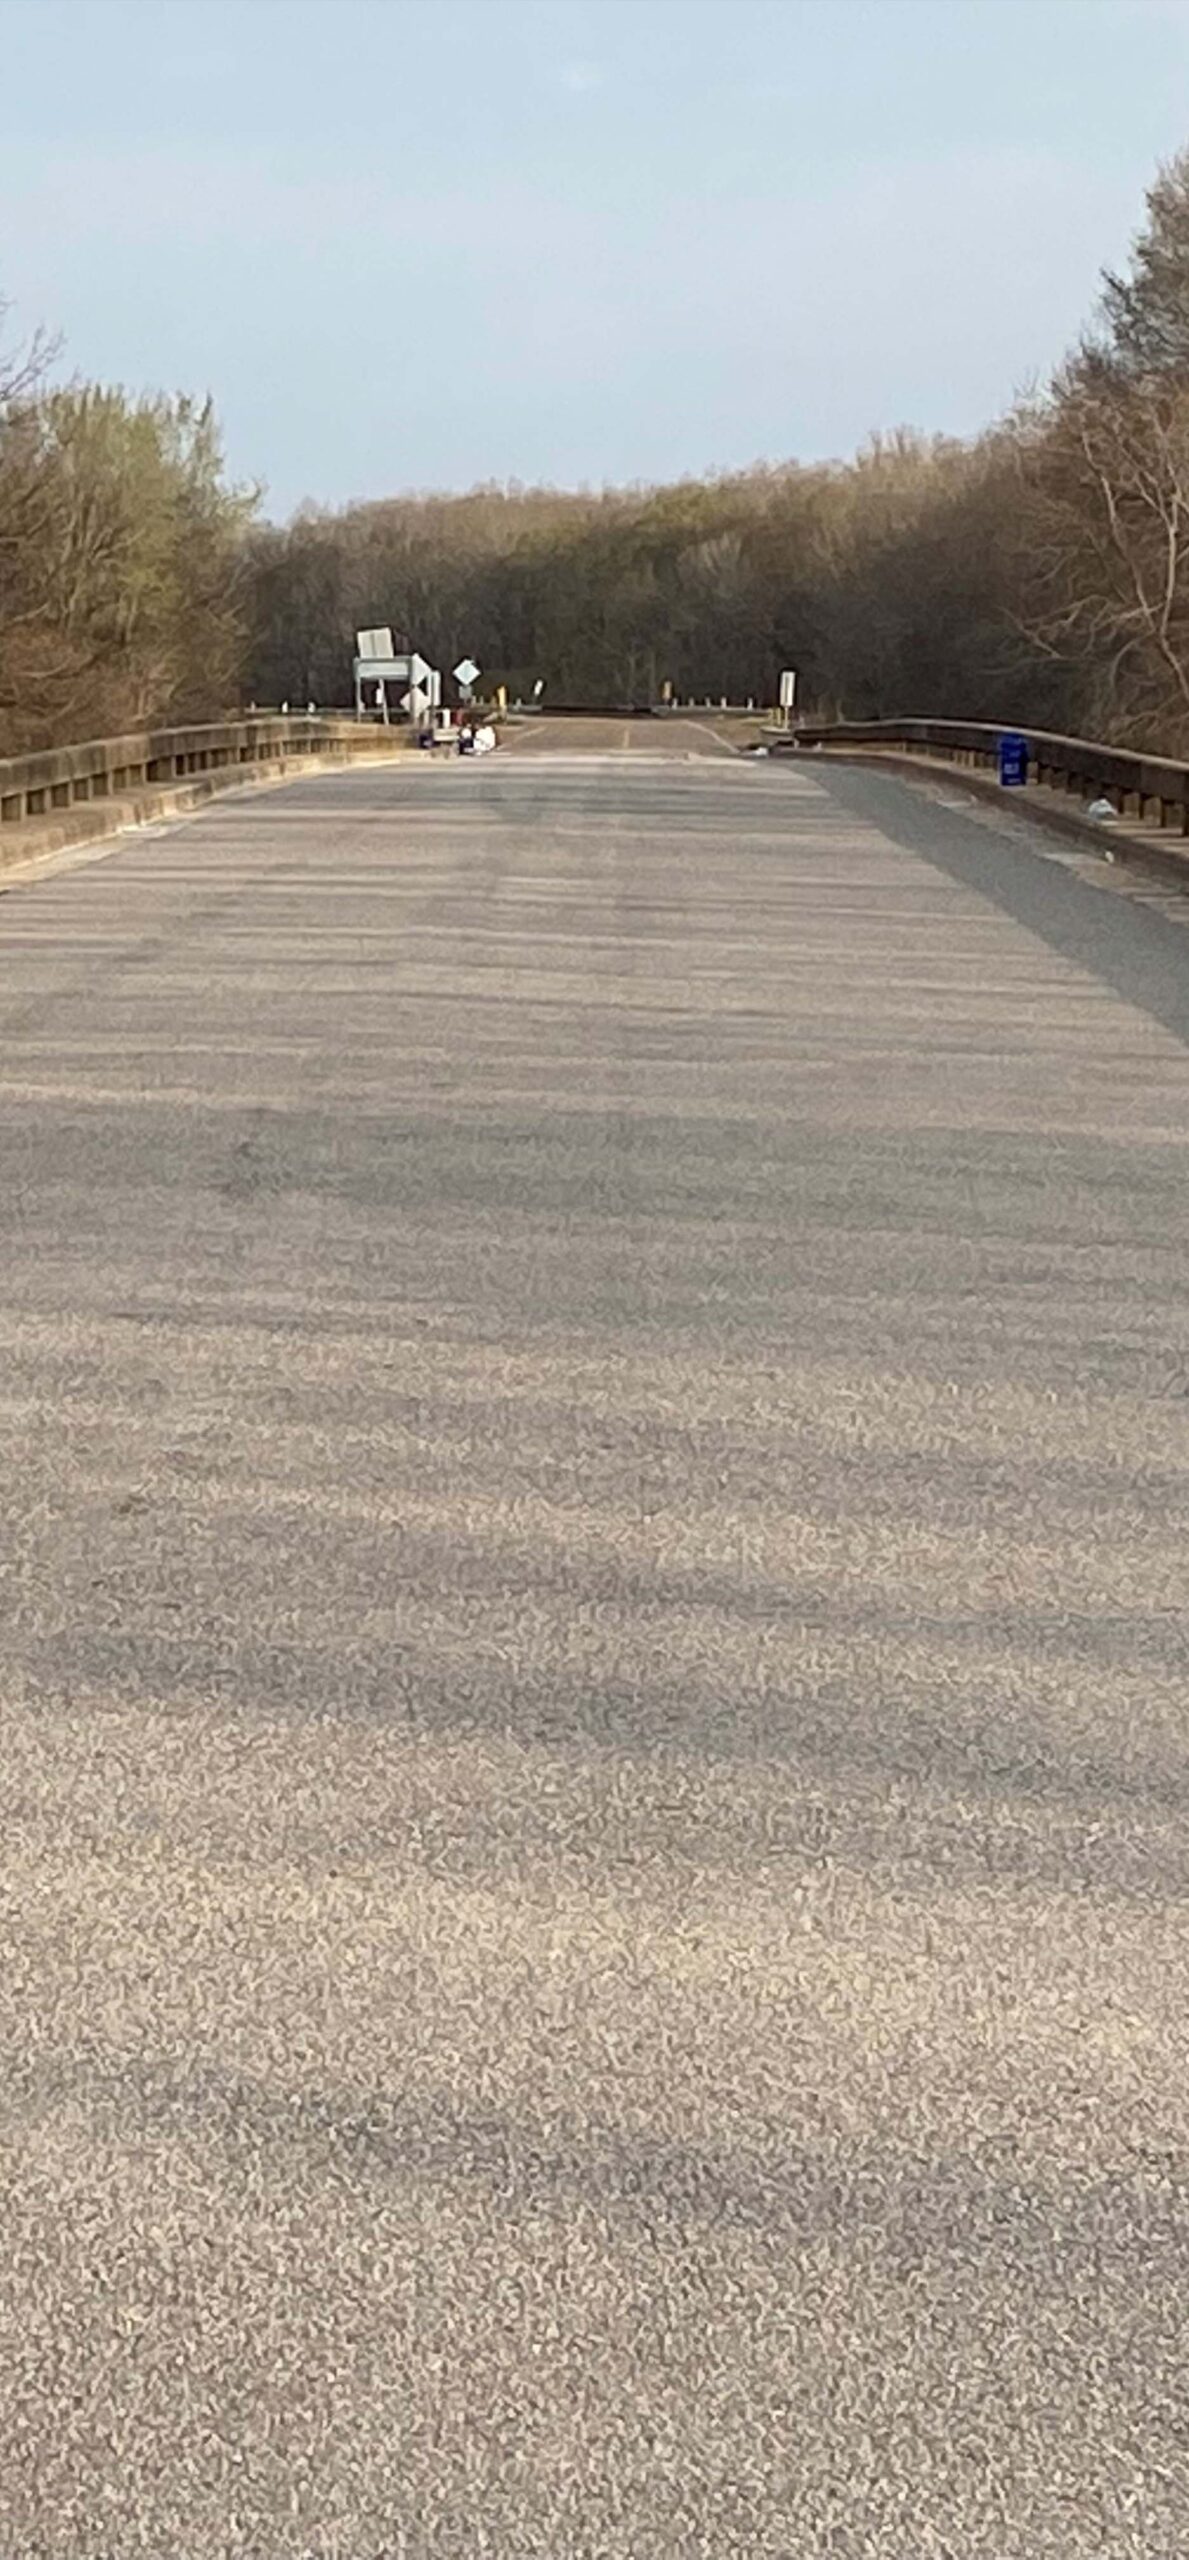 Yazoo, County bridge after application of Hybrid Polymer Concrete